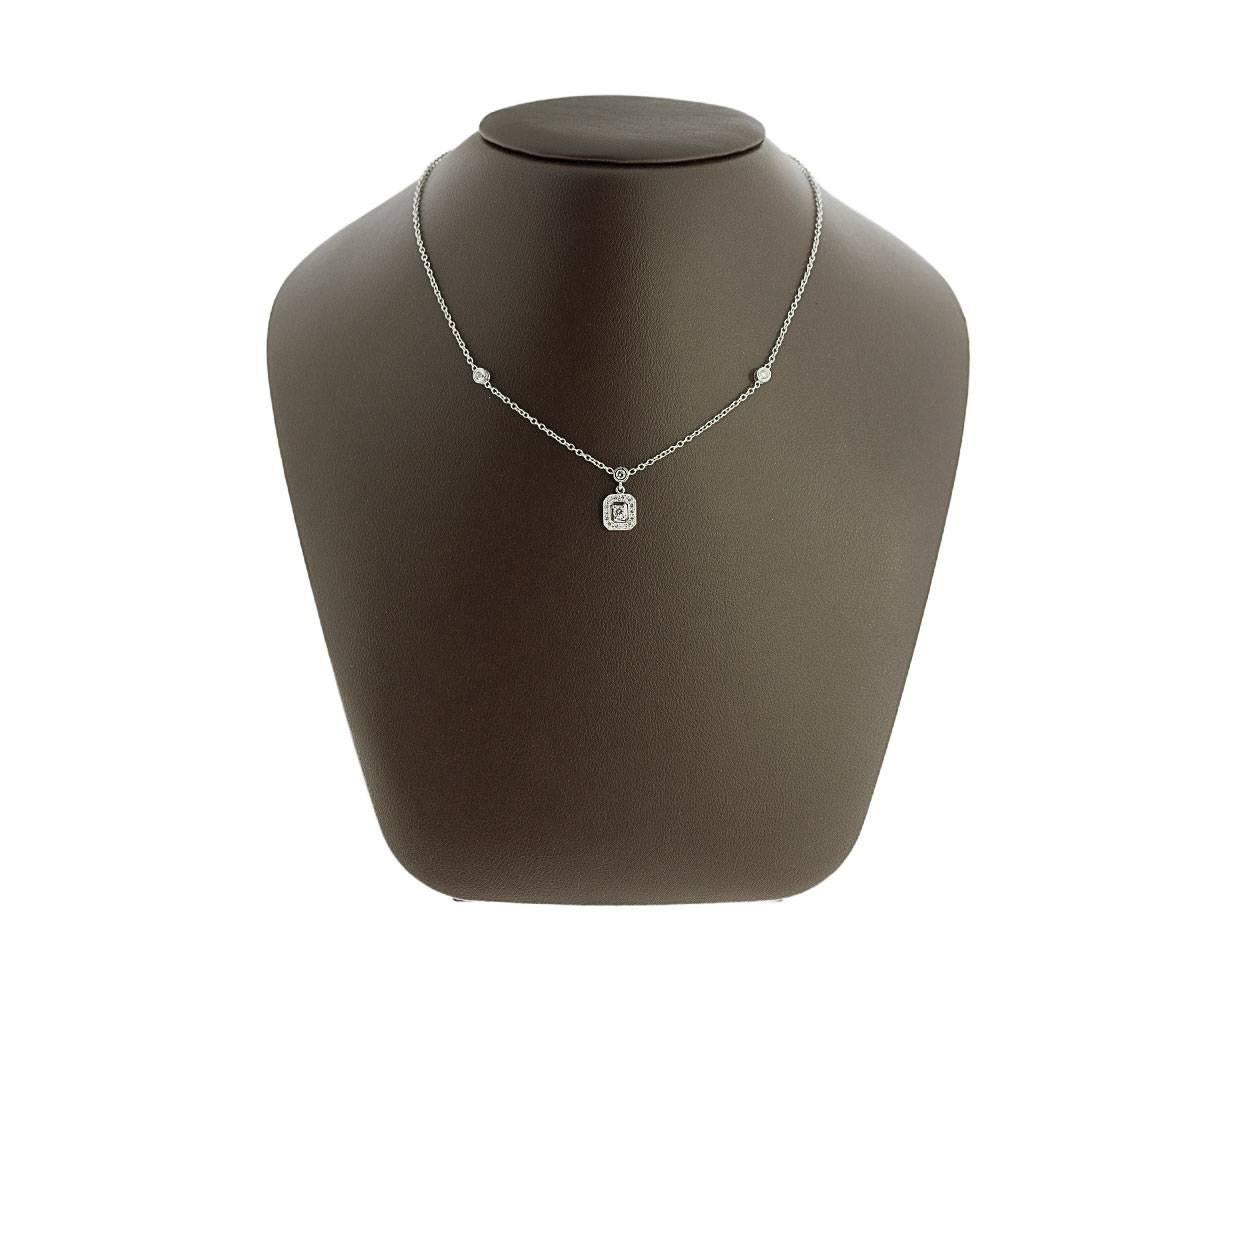 This gorgeous pendant is from the designer Penny Preville, who's been a legend in the jewelry business for over 40 years. Designing classic luxuries from intricate bridal to elegant everyday pieces, Penny captures the essence of what a woman wants